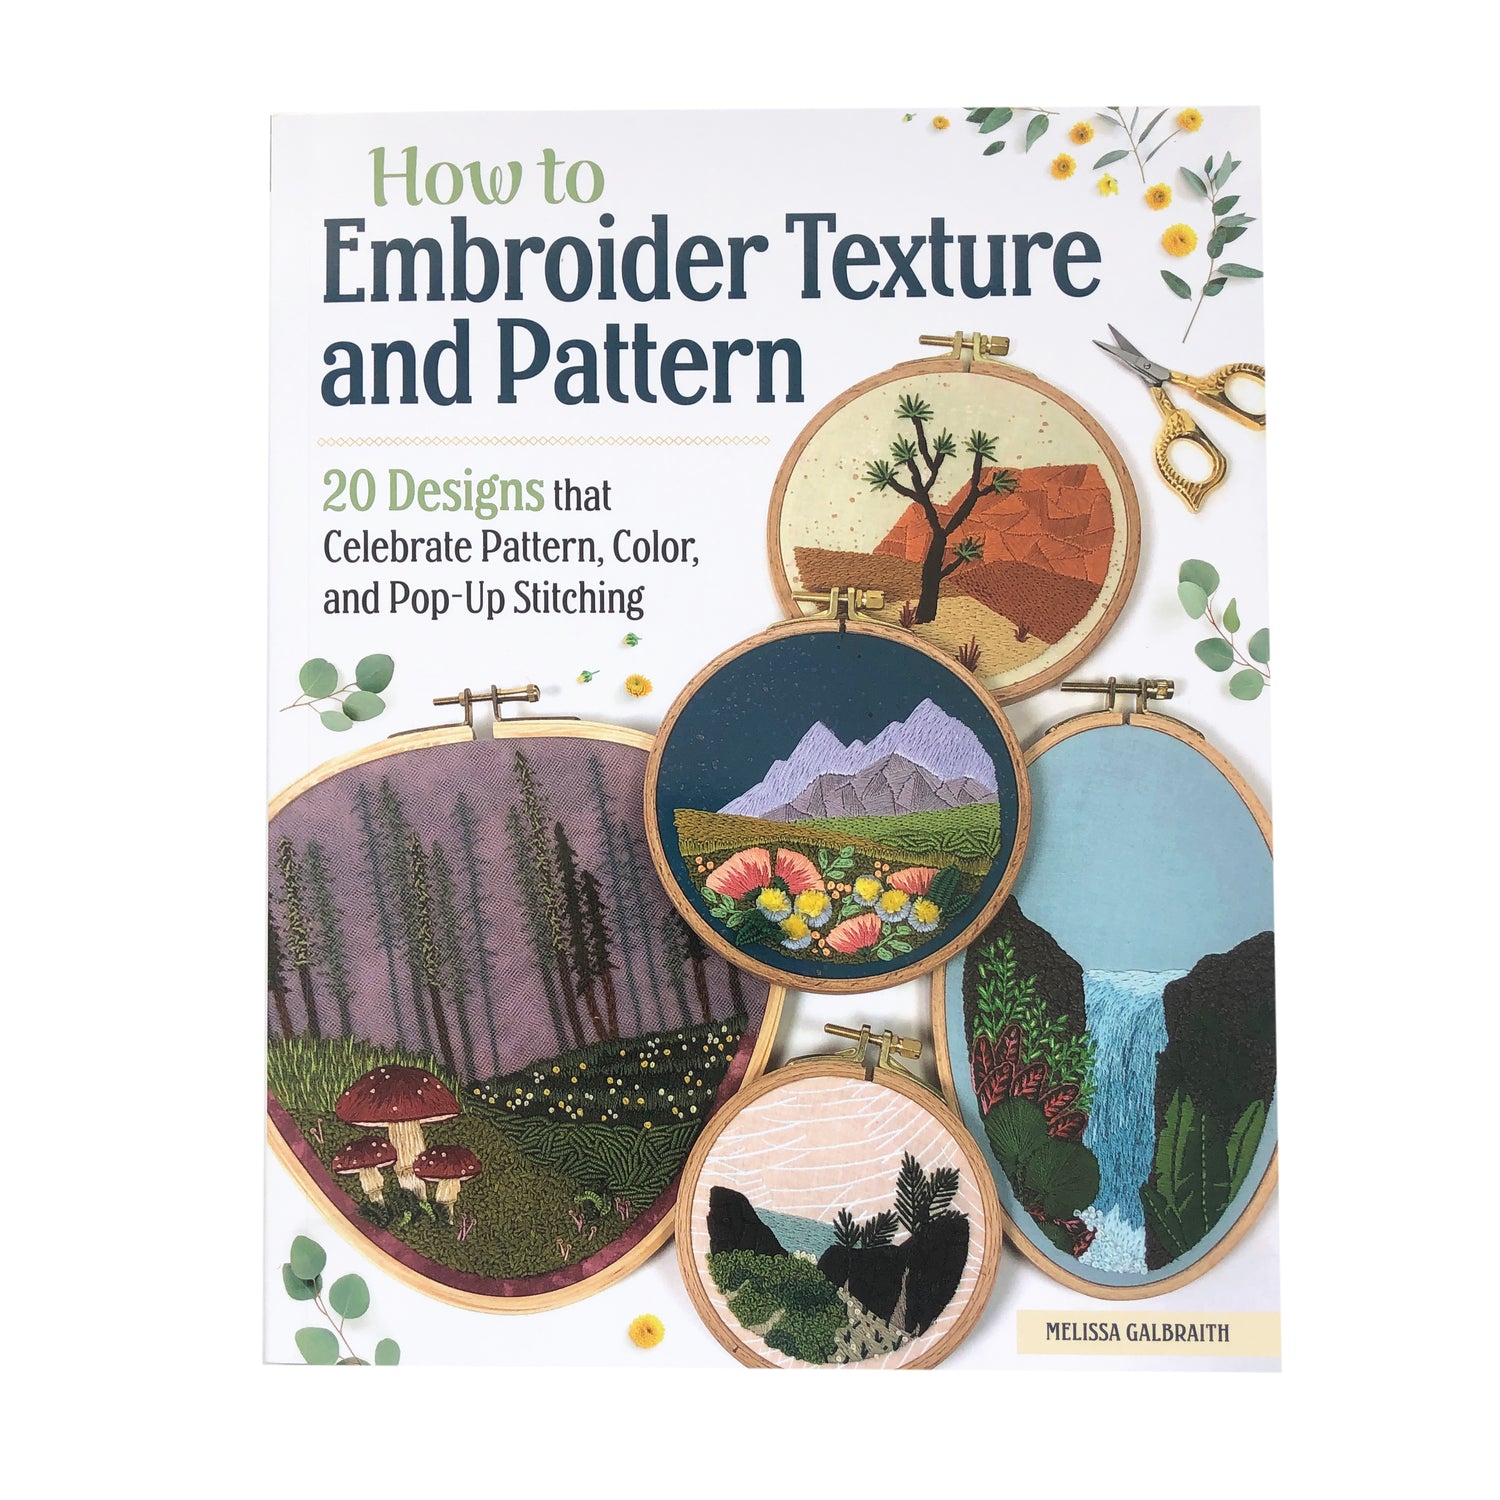 How to Embroider Texture and Pattern: 20 Designs That Celebrate Pattern, Color, and Pop-Up Stitching [Book]